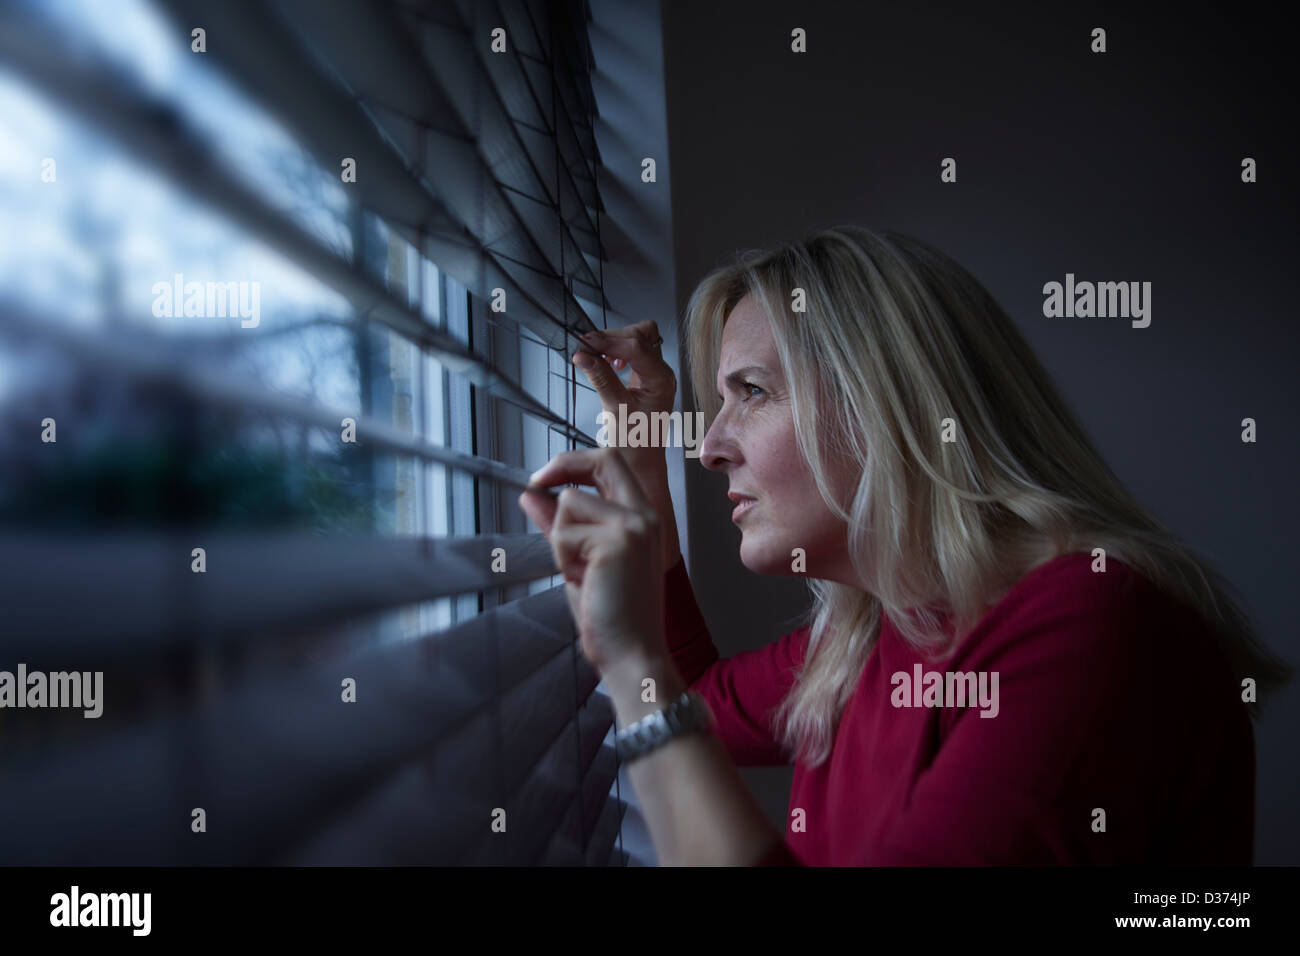 Profile of a woman with long blonde hair, peering through a window blind from inside looking out, light is hitting her face. Stock Photo